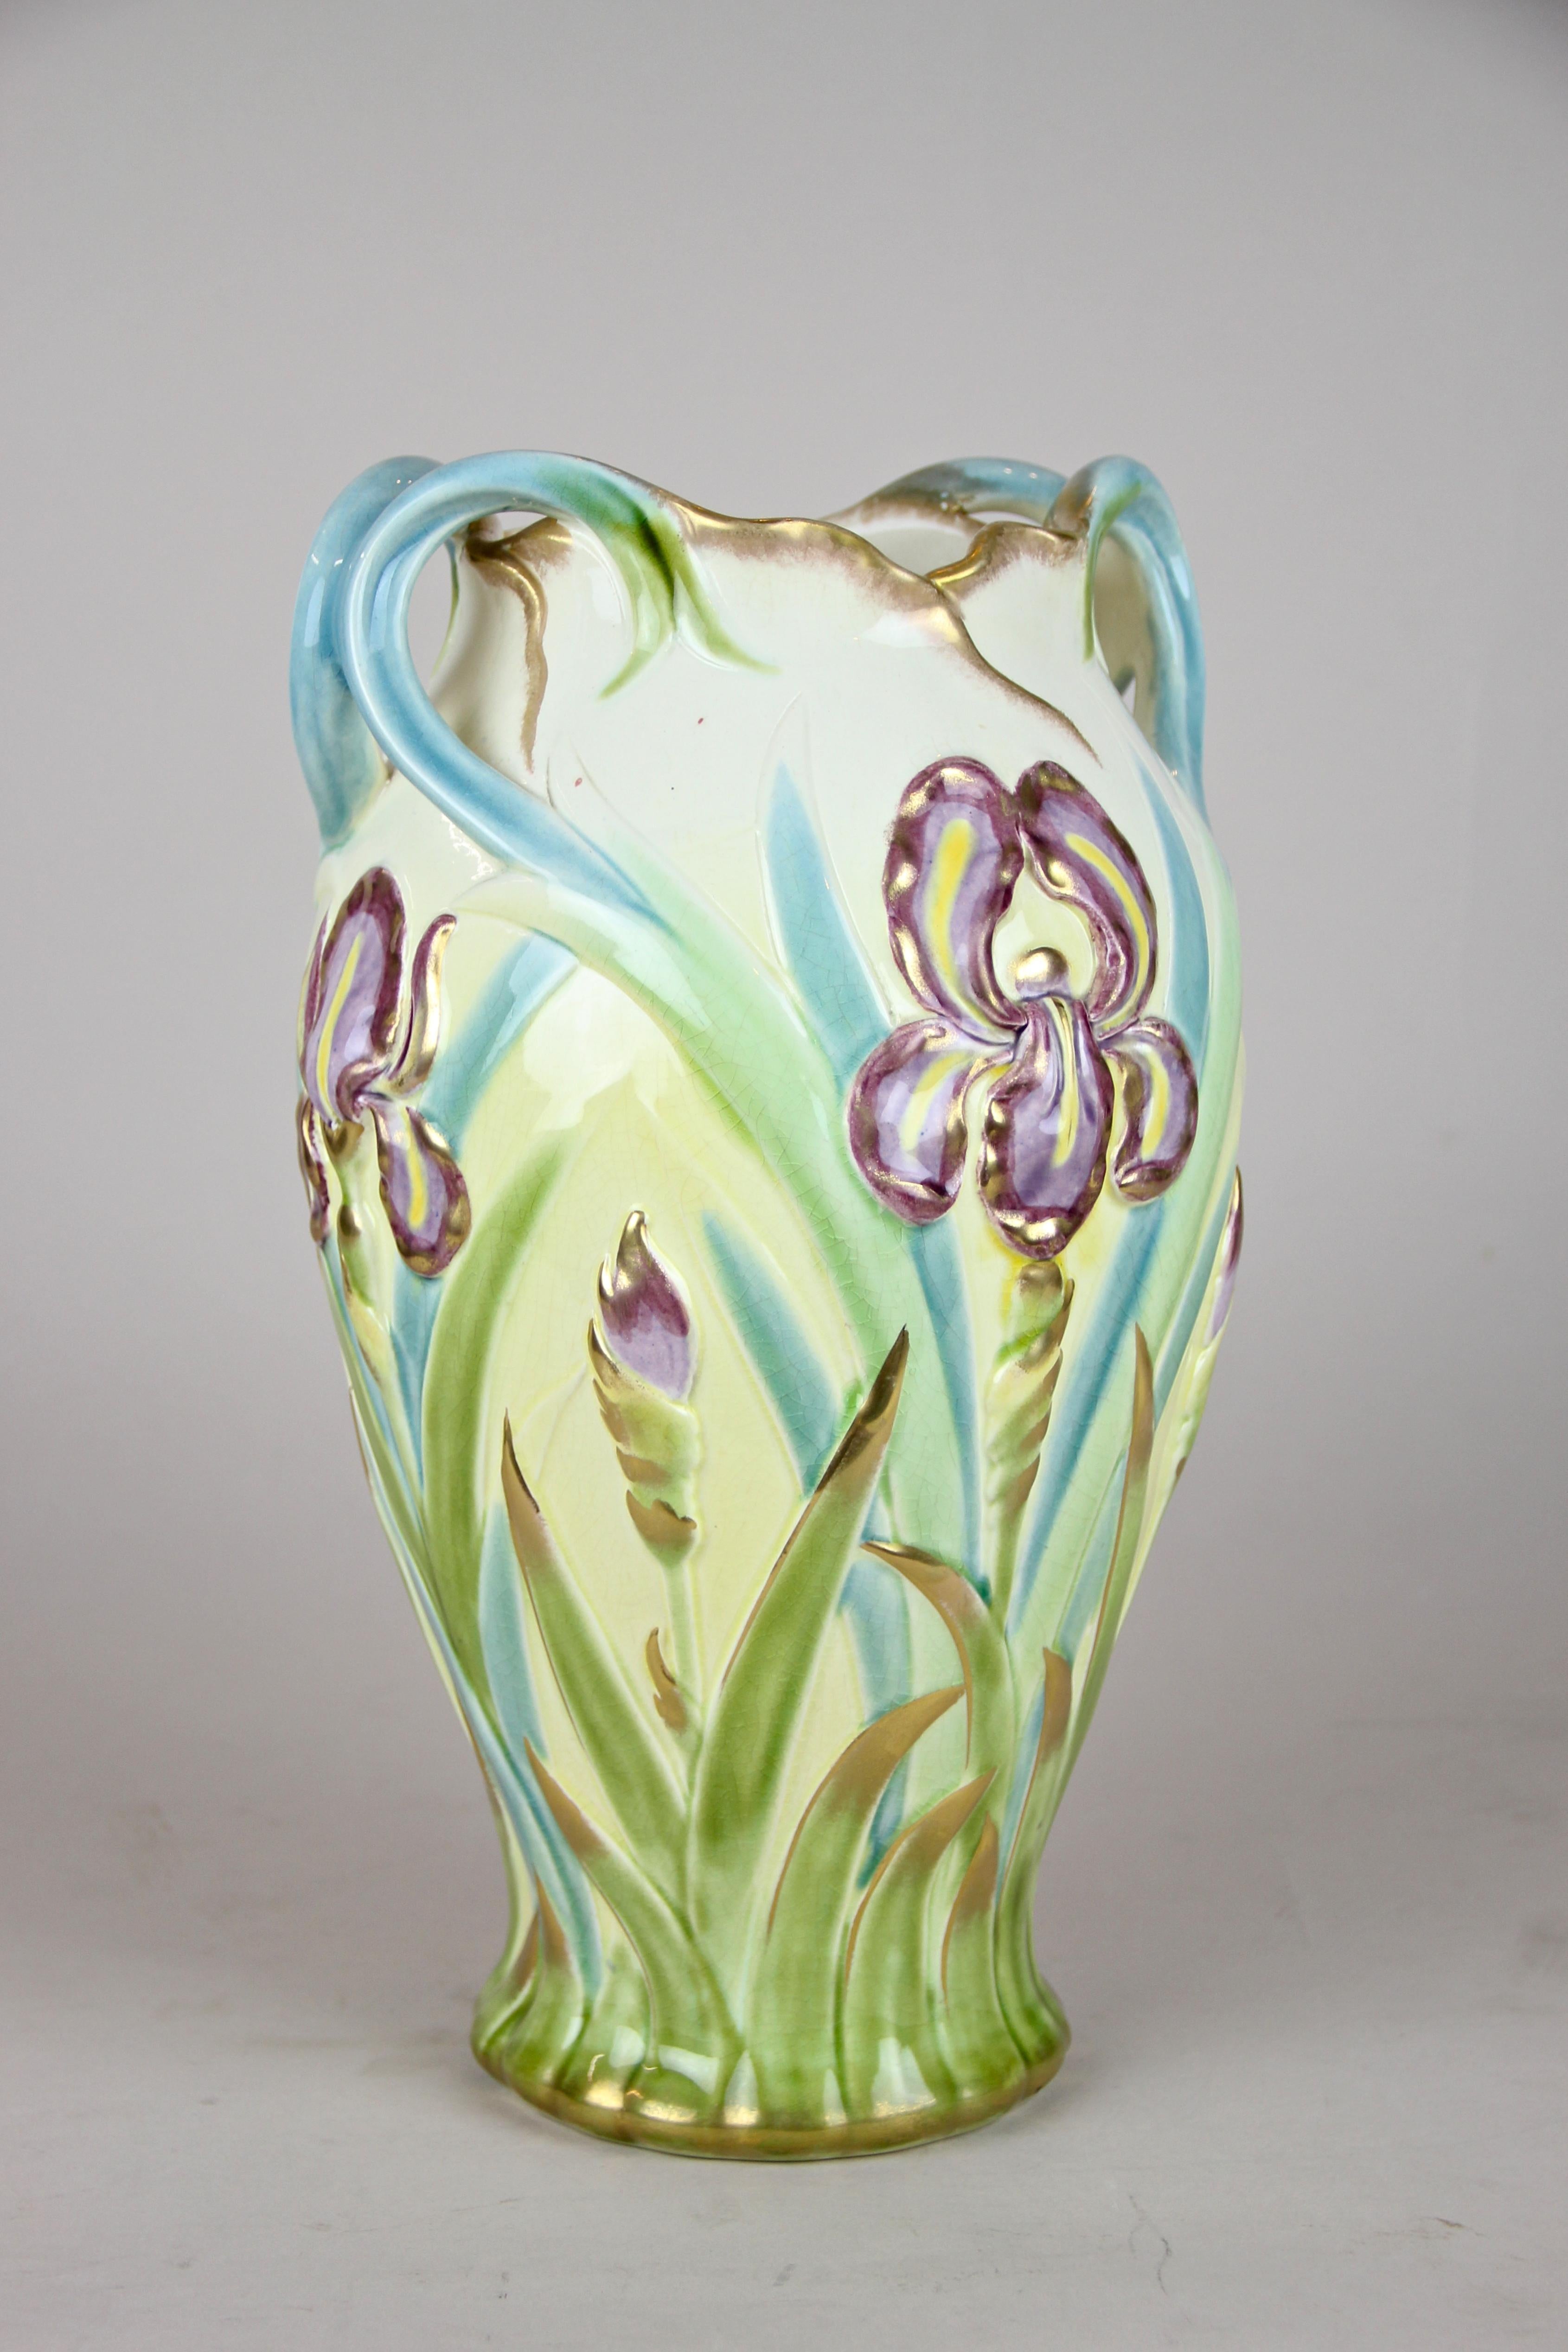 Charming French Majolica vase by Sarreguemines out of France, circa 1915. This early 20th century vase shows an absolute lovely colored floral design. The bulbous body is adorned by depictions of grass and beautiful violets, highlighted by gilt